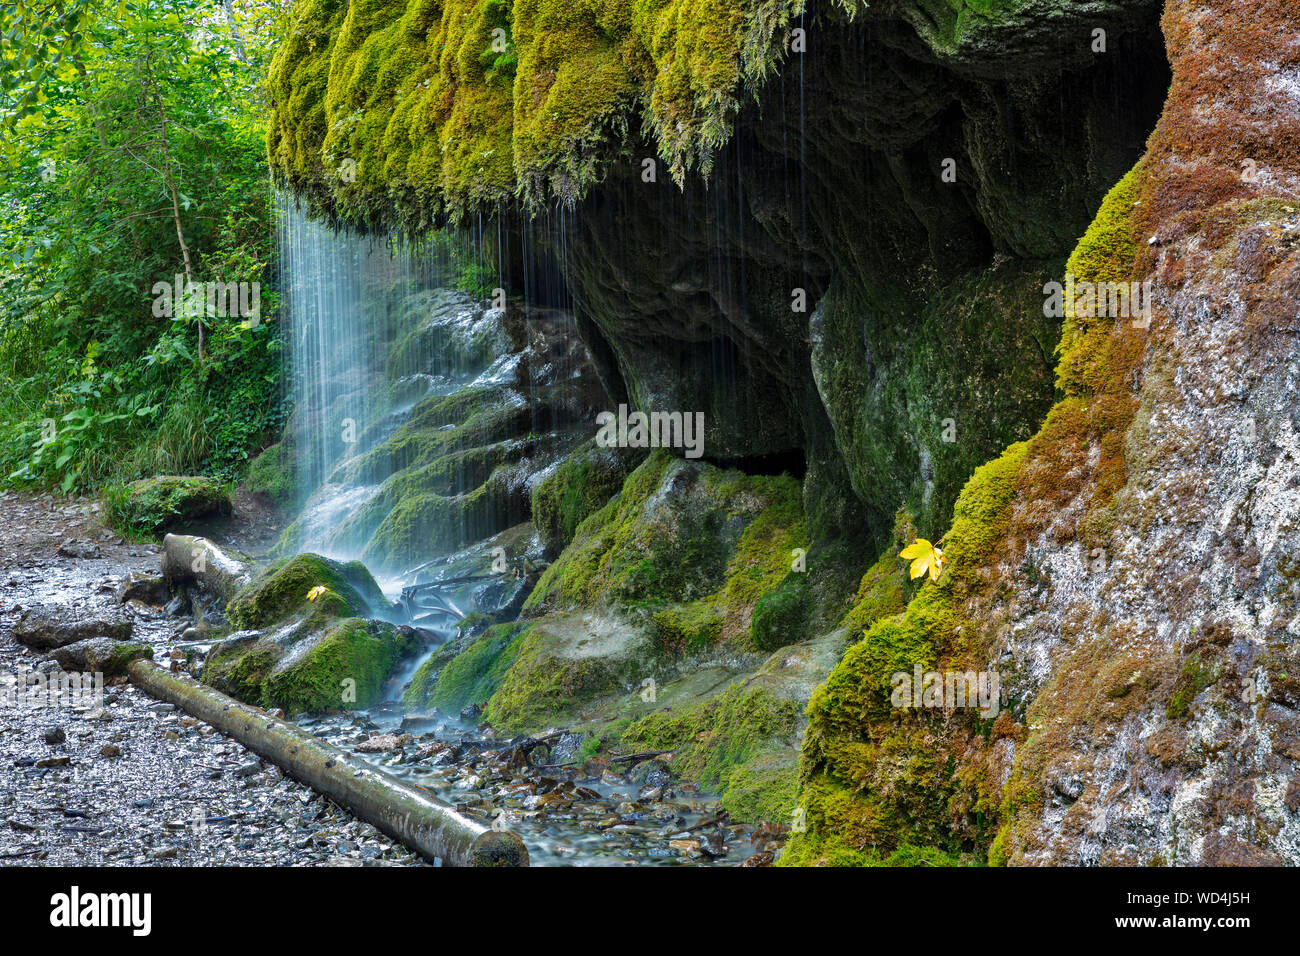 moss-covered waterfall Wutachschlucht gorge, Black Forest, Baden-Württemberg, Germany, Stock Photo